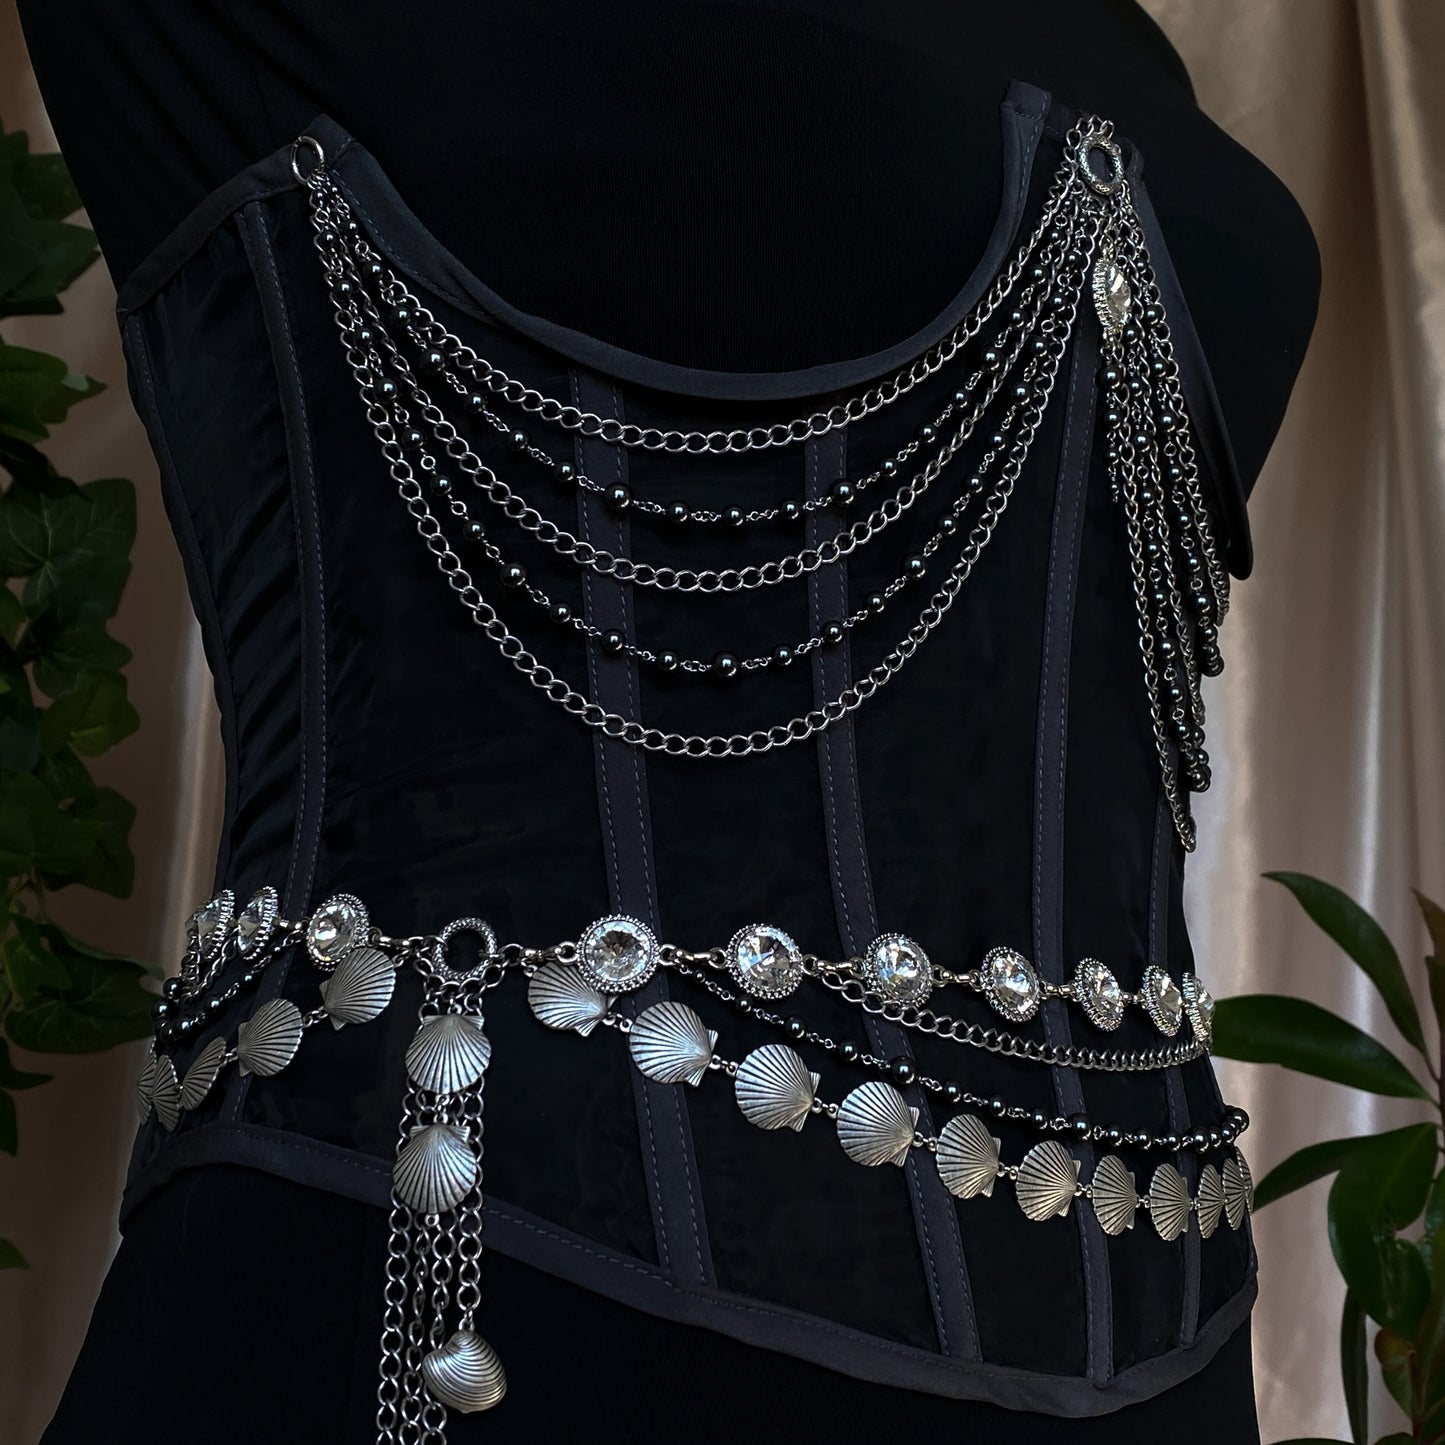 Tara ~ Dark Siren Upcycled Corset with Glass Pearls, Faceted Glass, Antique Silver and Stainless Steel